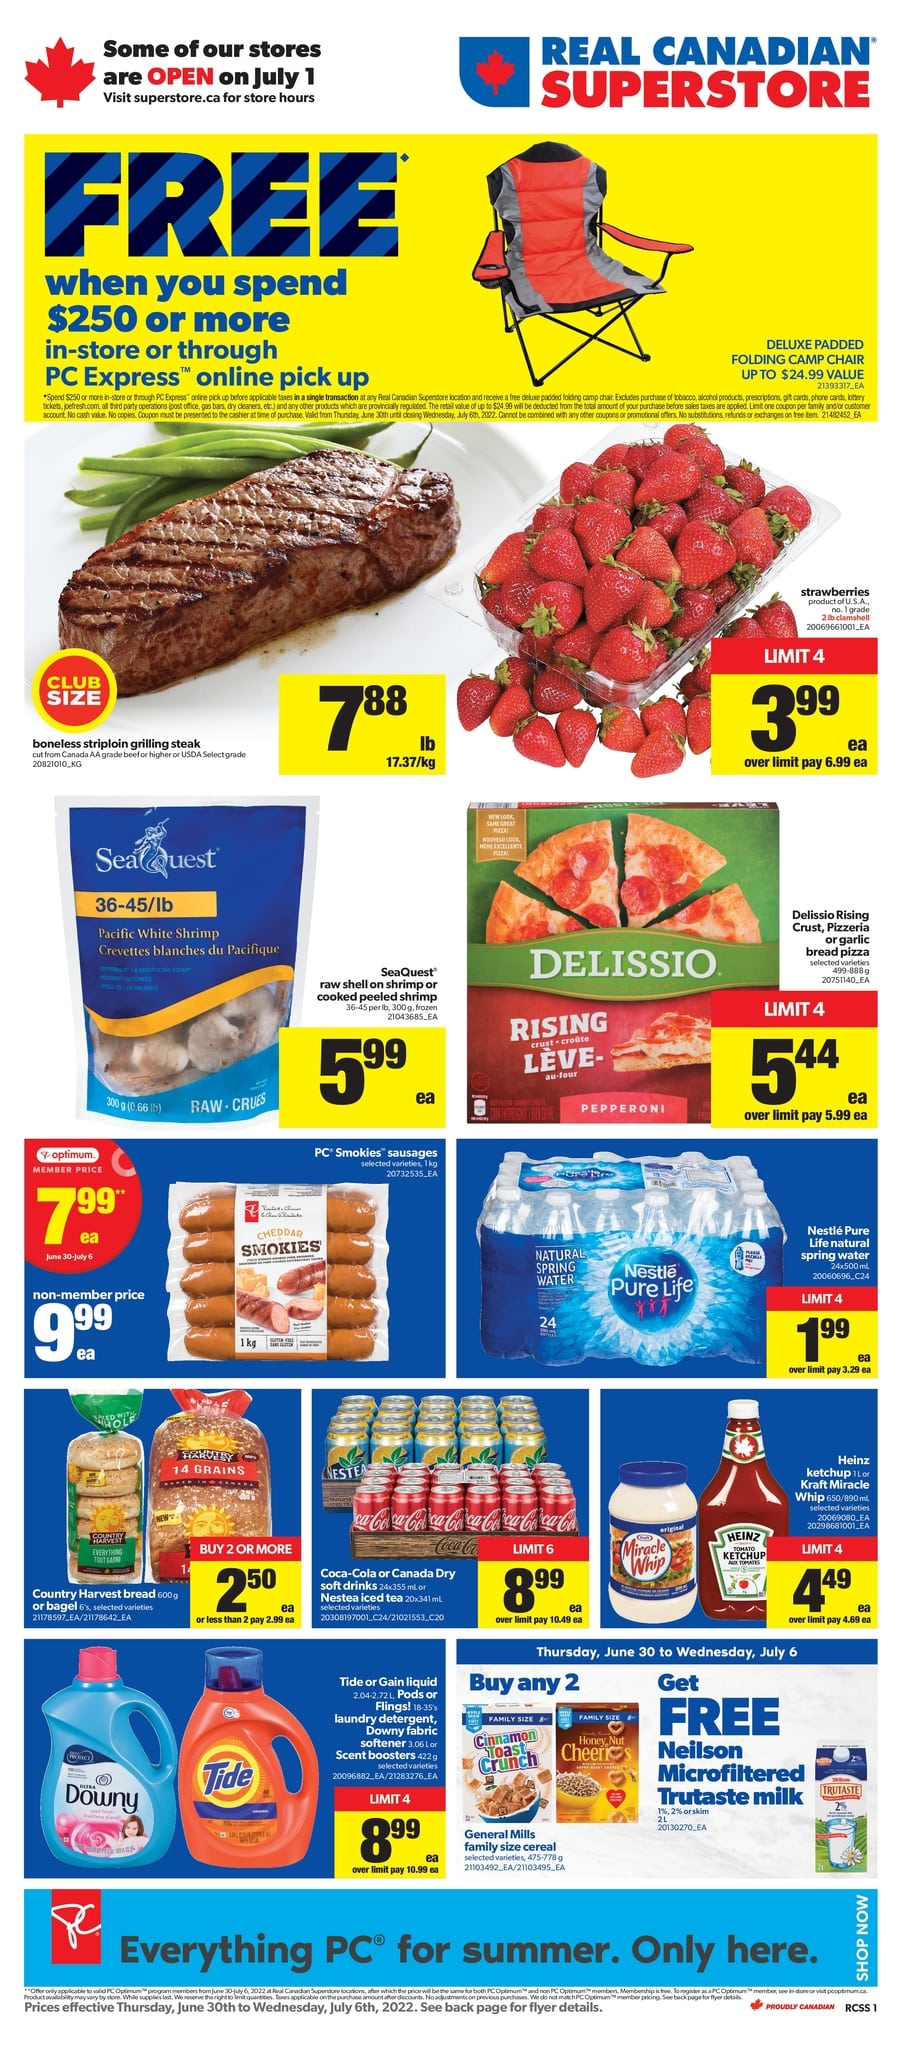 Real Canadian Superstore Ontario - Weekly Flyer Specials - Page 1